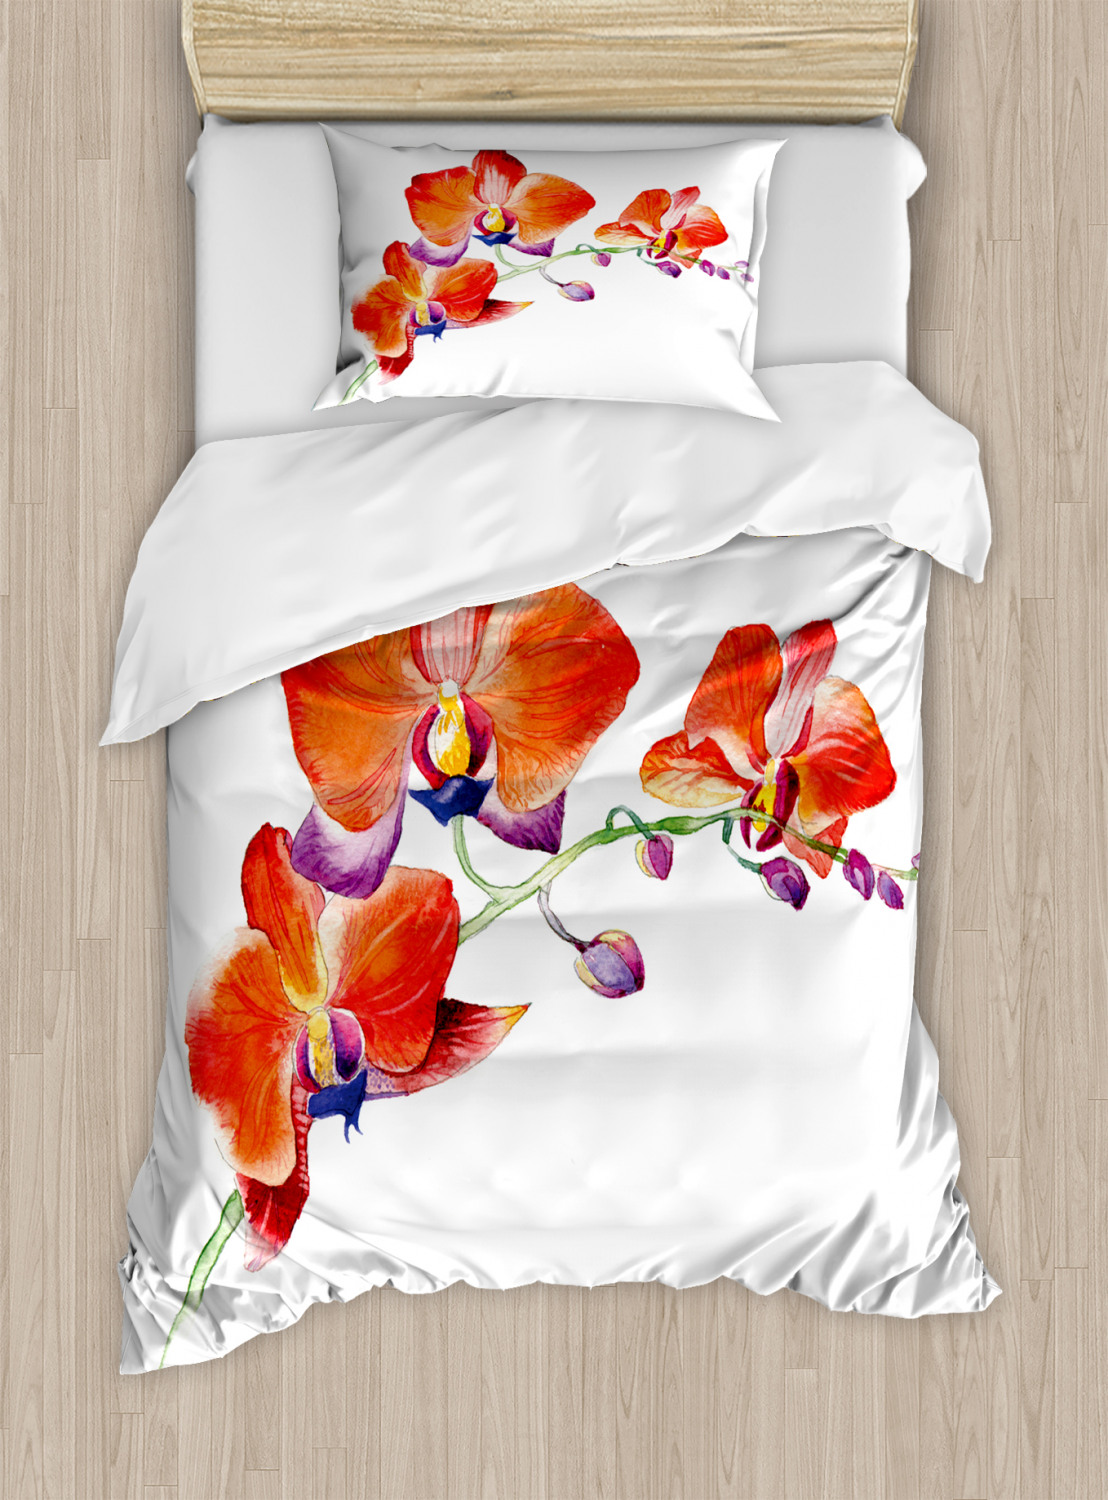 Flower Duvet Cover Set with Pillow Shams Orchid Branch Blooms Print | eBay